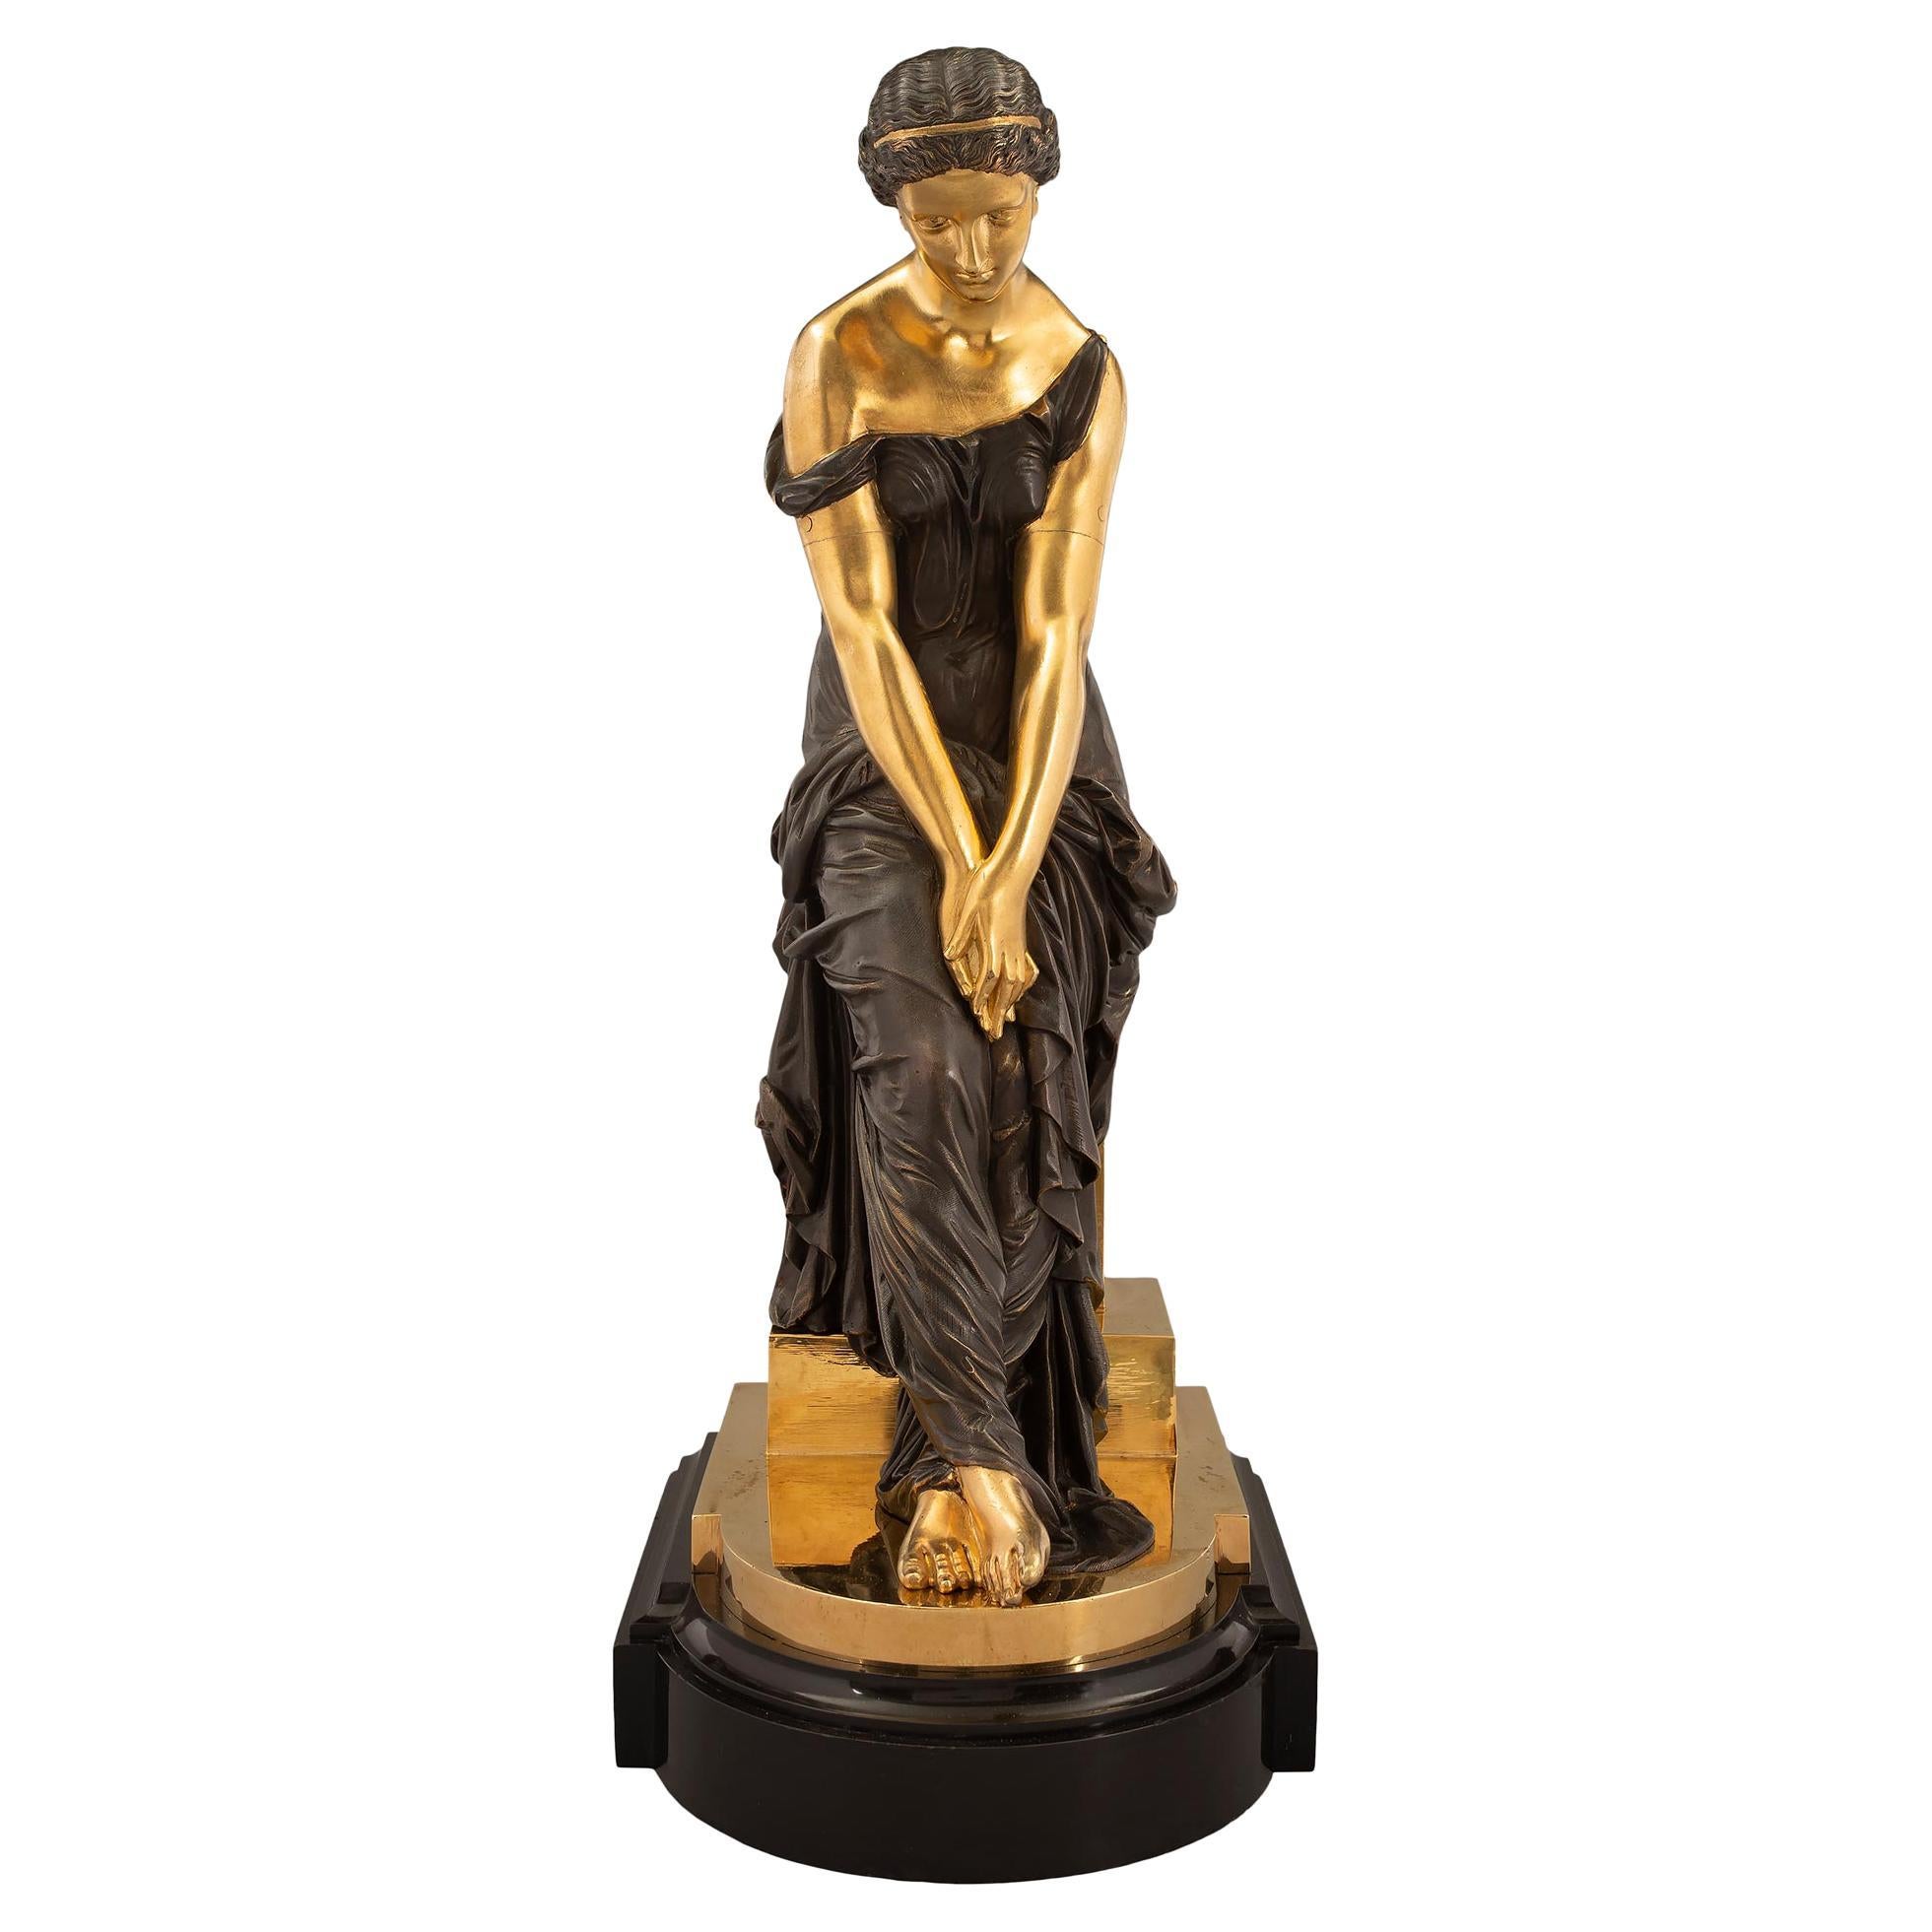 French Mid-19th Century Louis XVI Style Bronze and Ormolu Statue by Schoenwerck For Sale